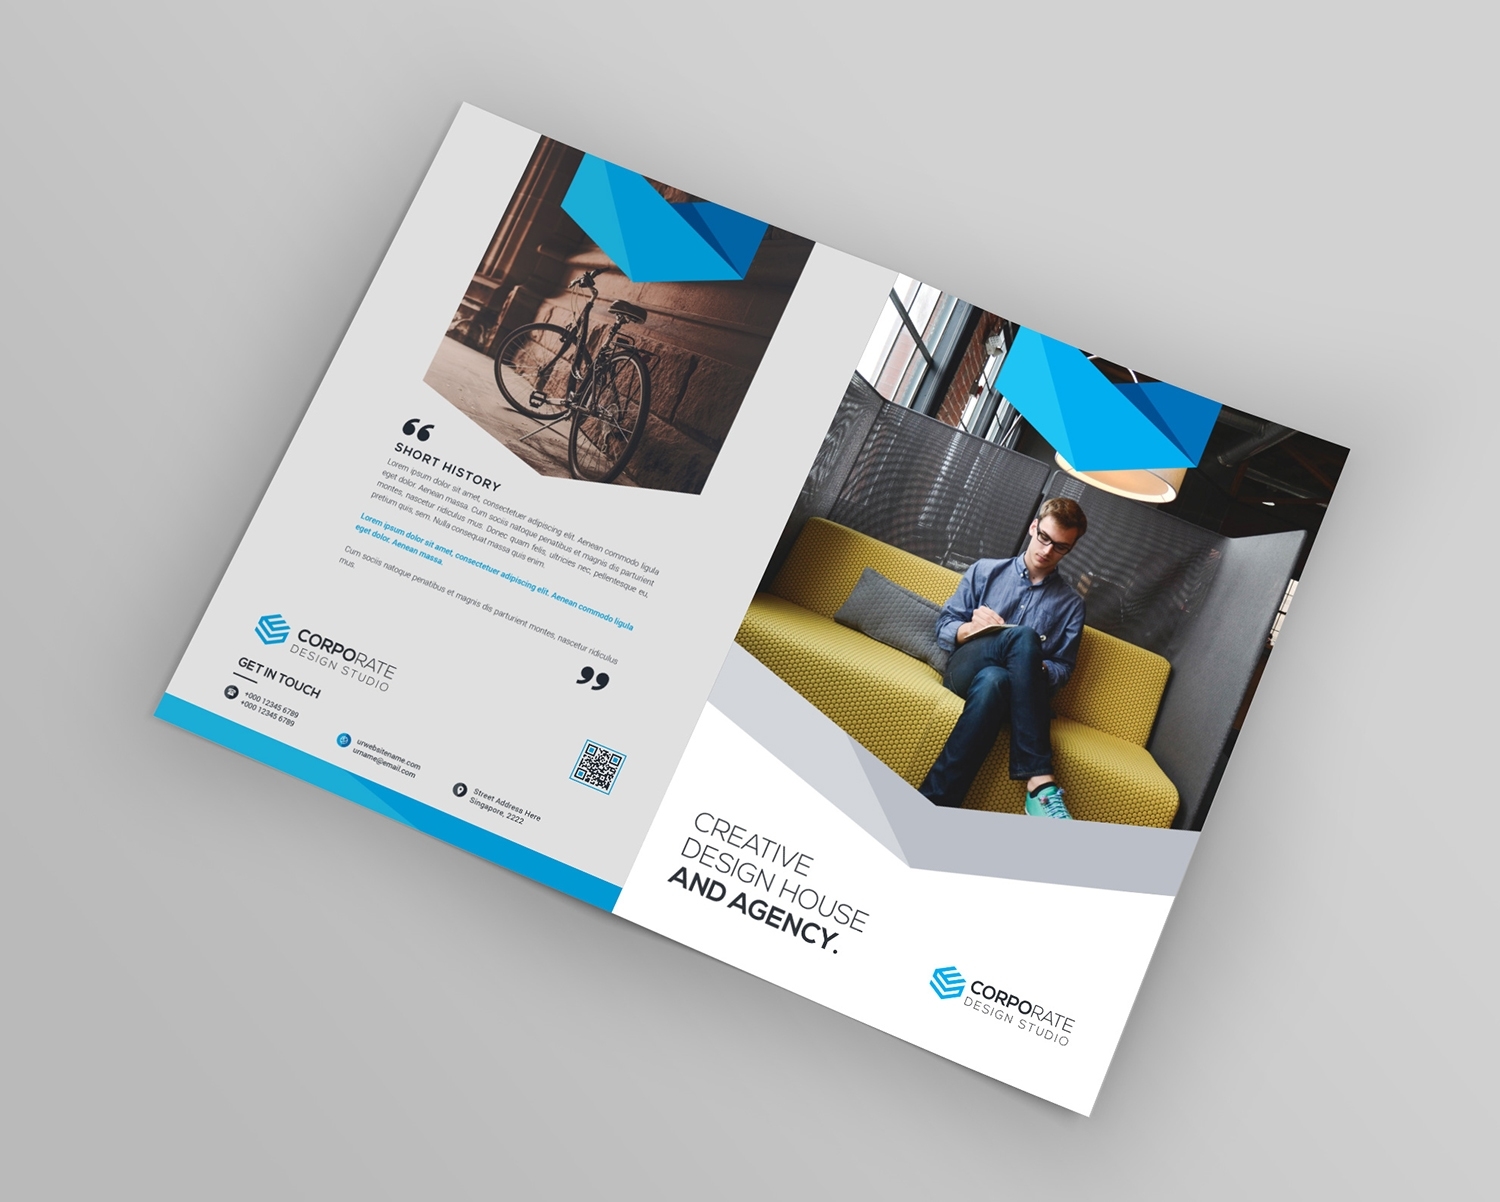 Design Professional Brochure For Your Company For $10 – Pixelclerks Throughout Professional Brochure Design Templates